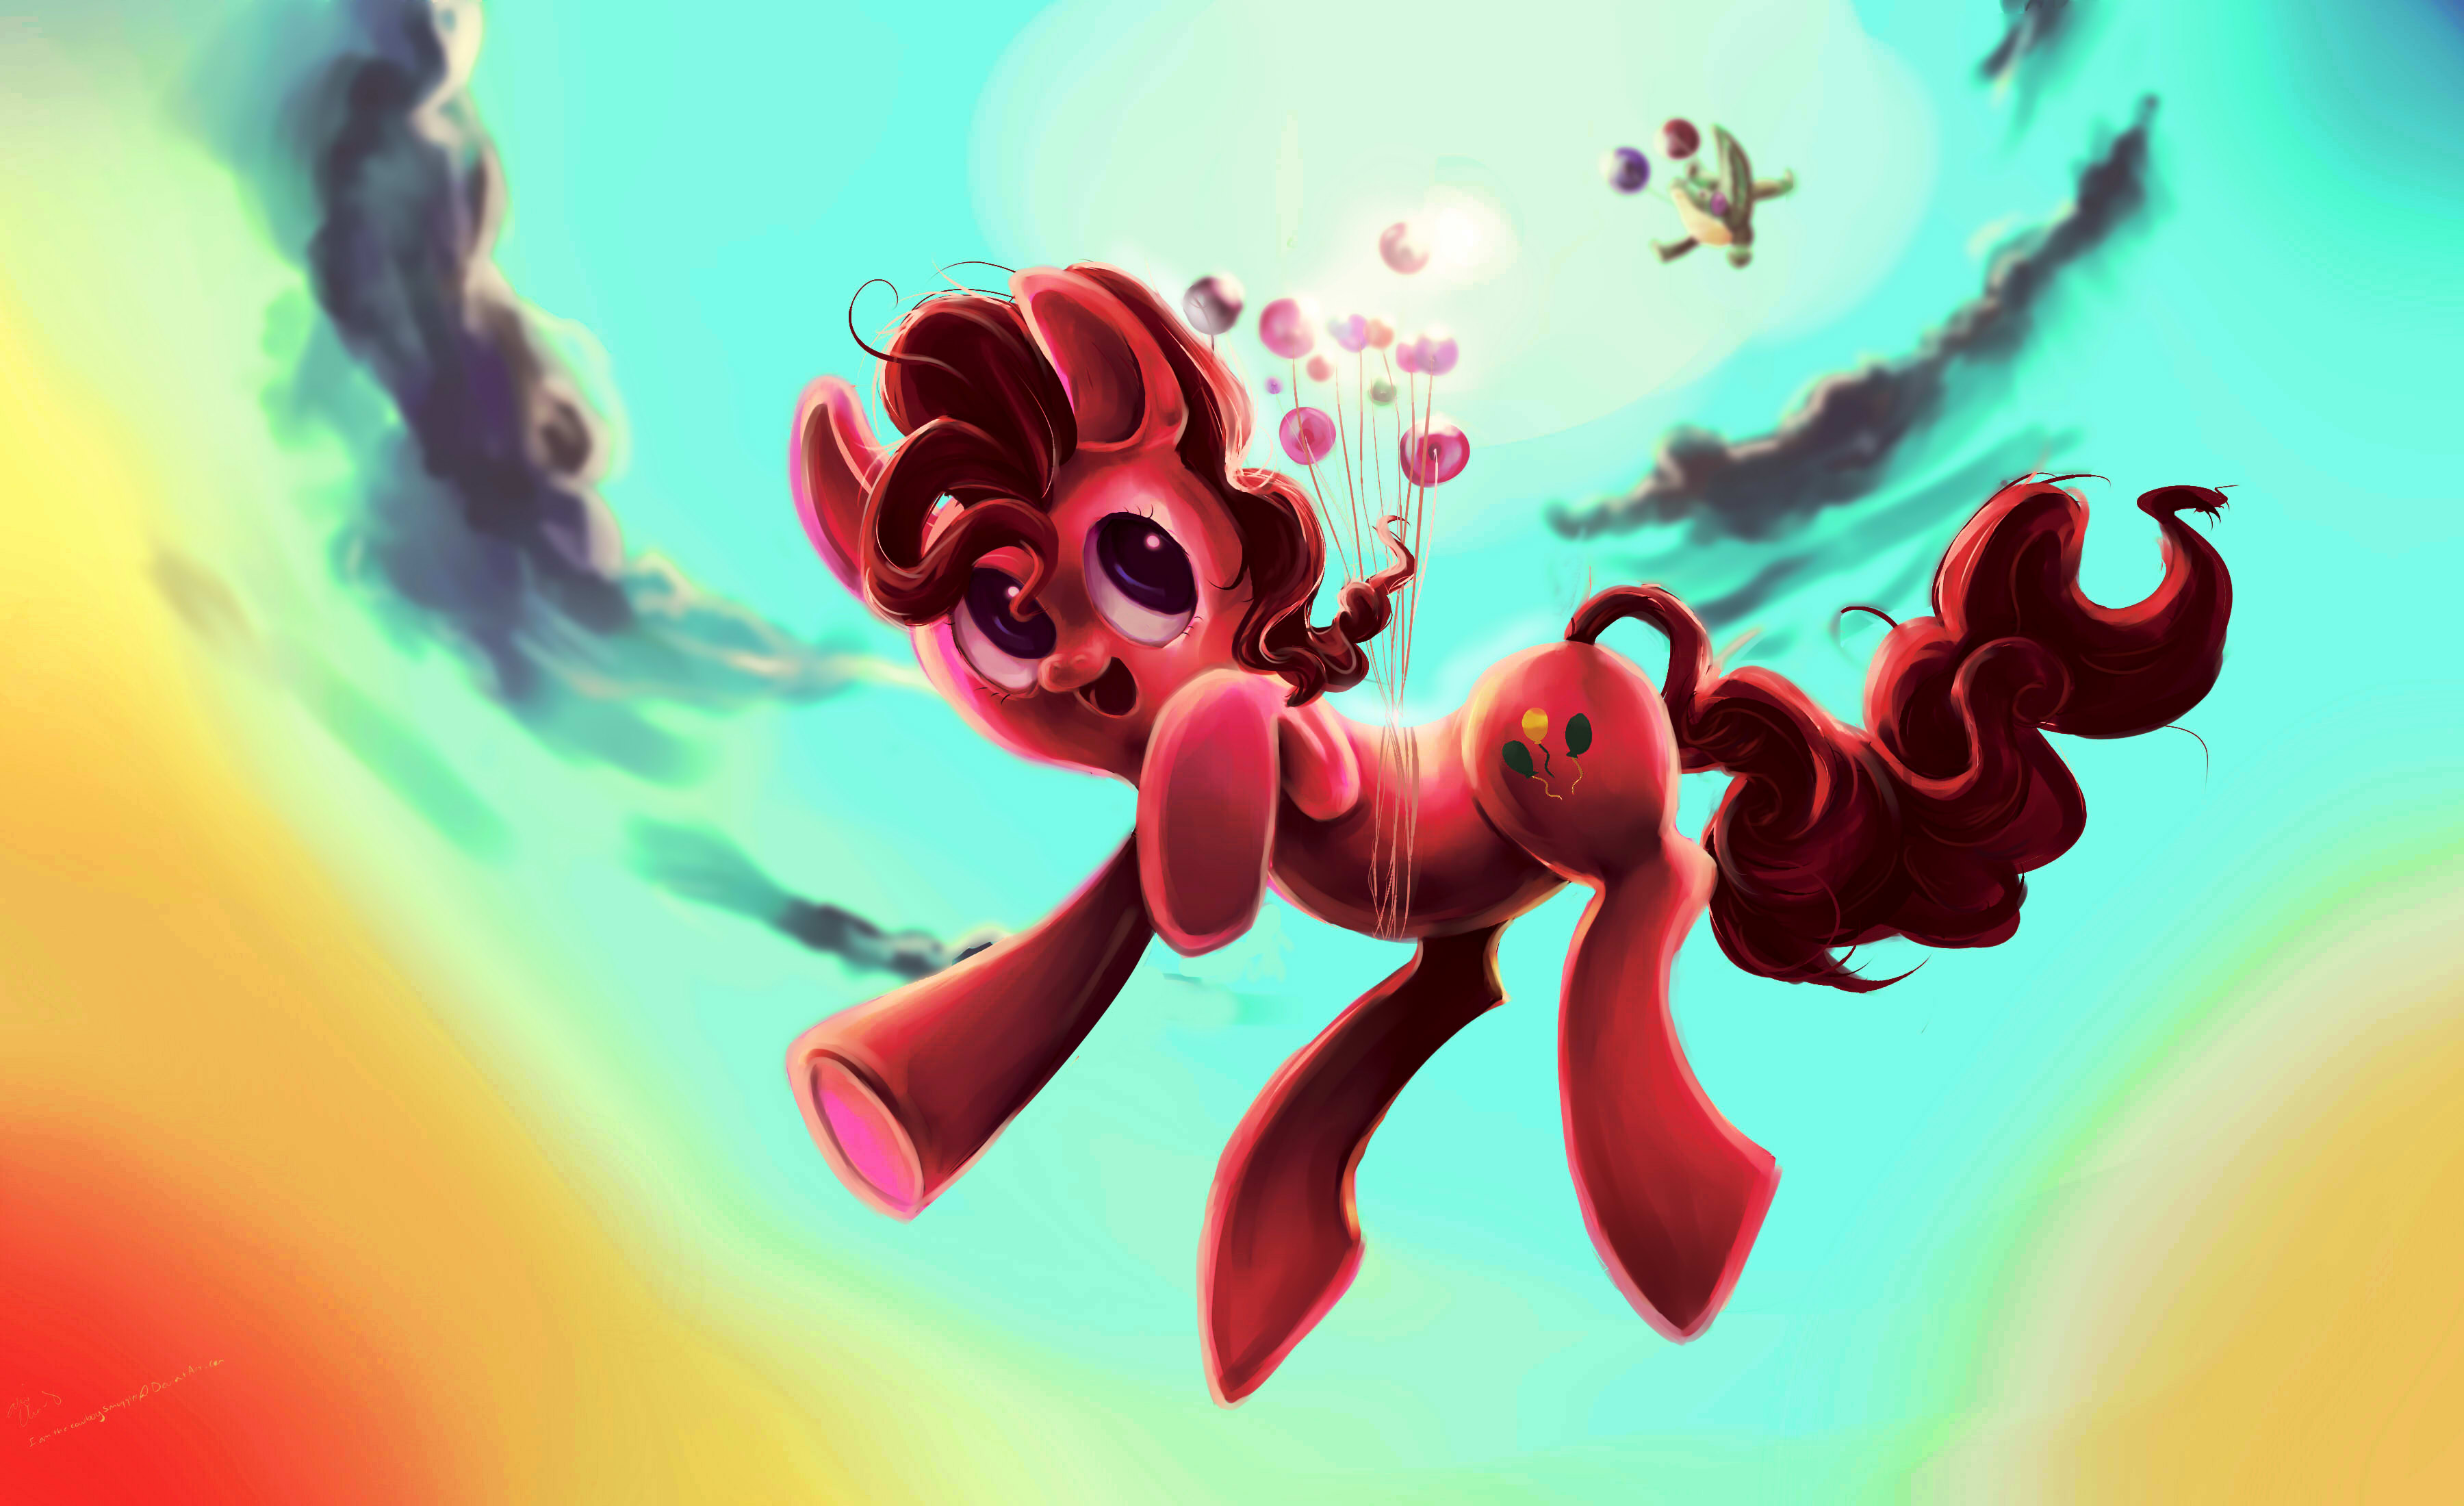 Party in the Sky by The-Cowboy-Smuggler